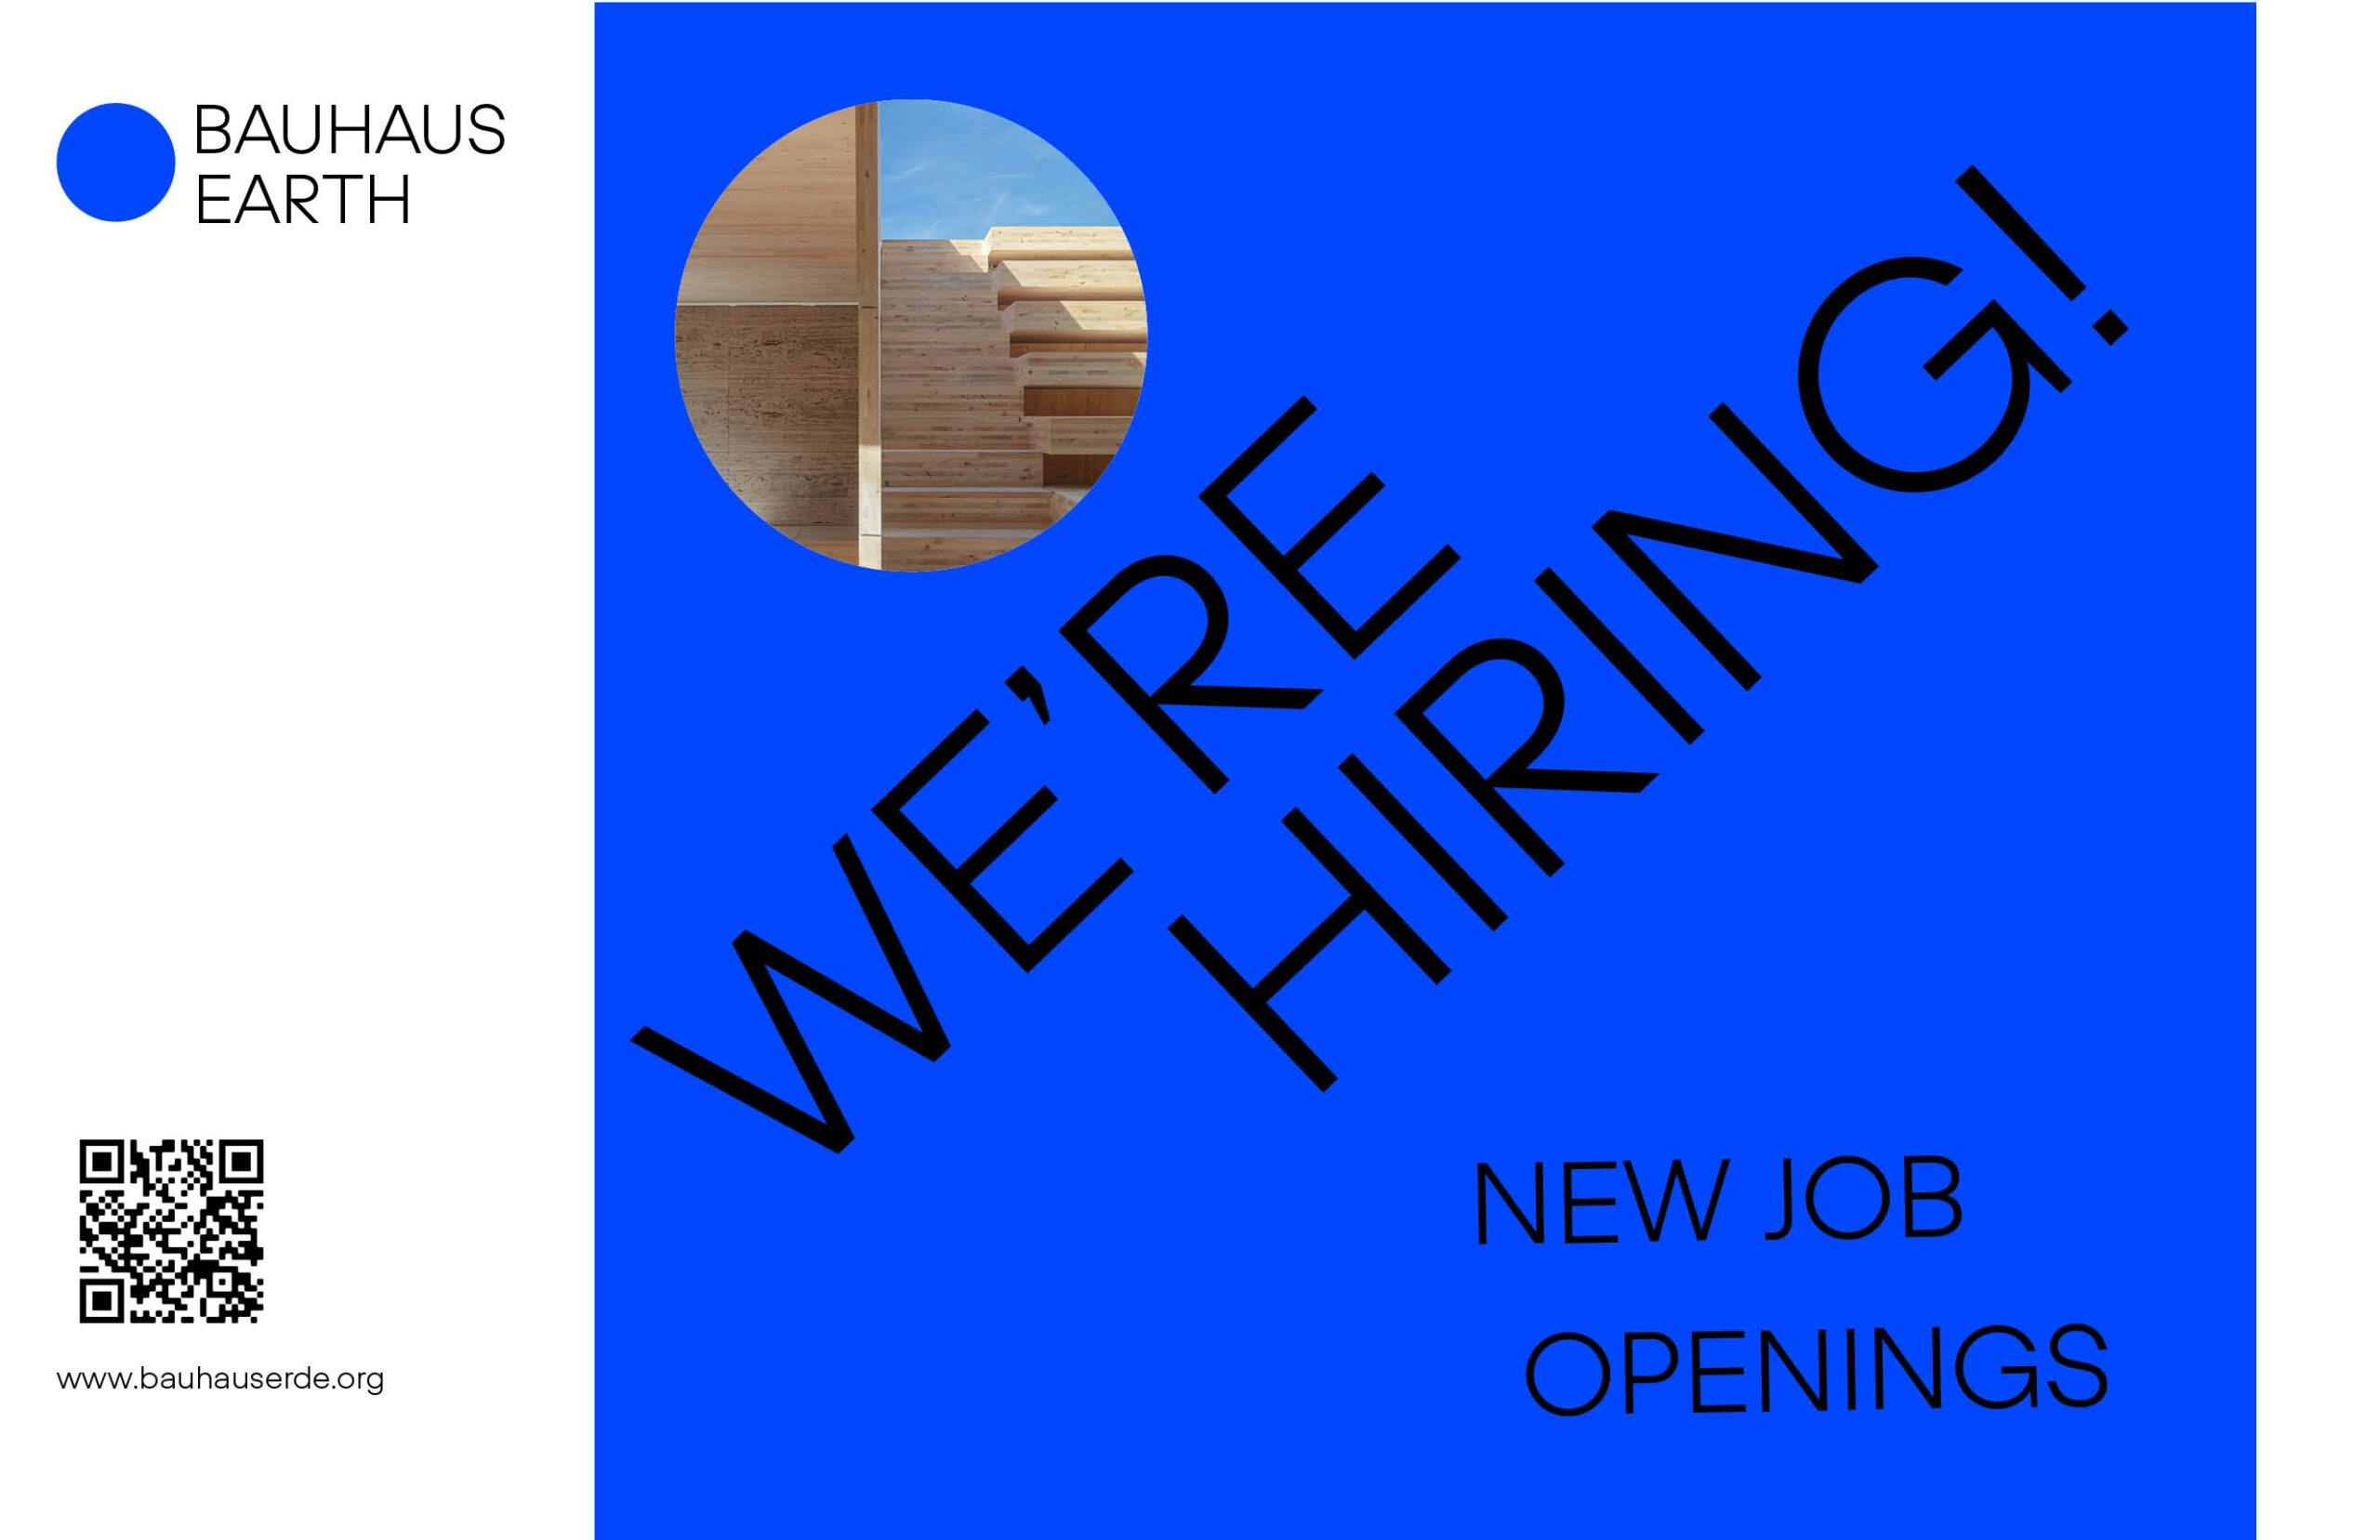 four open positions at bauhaus earth